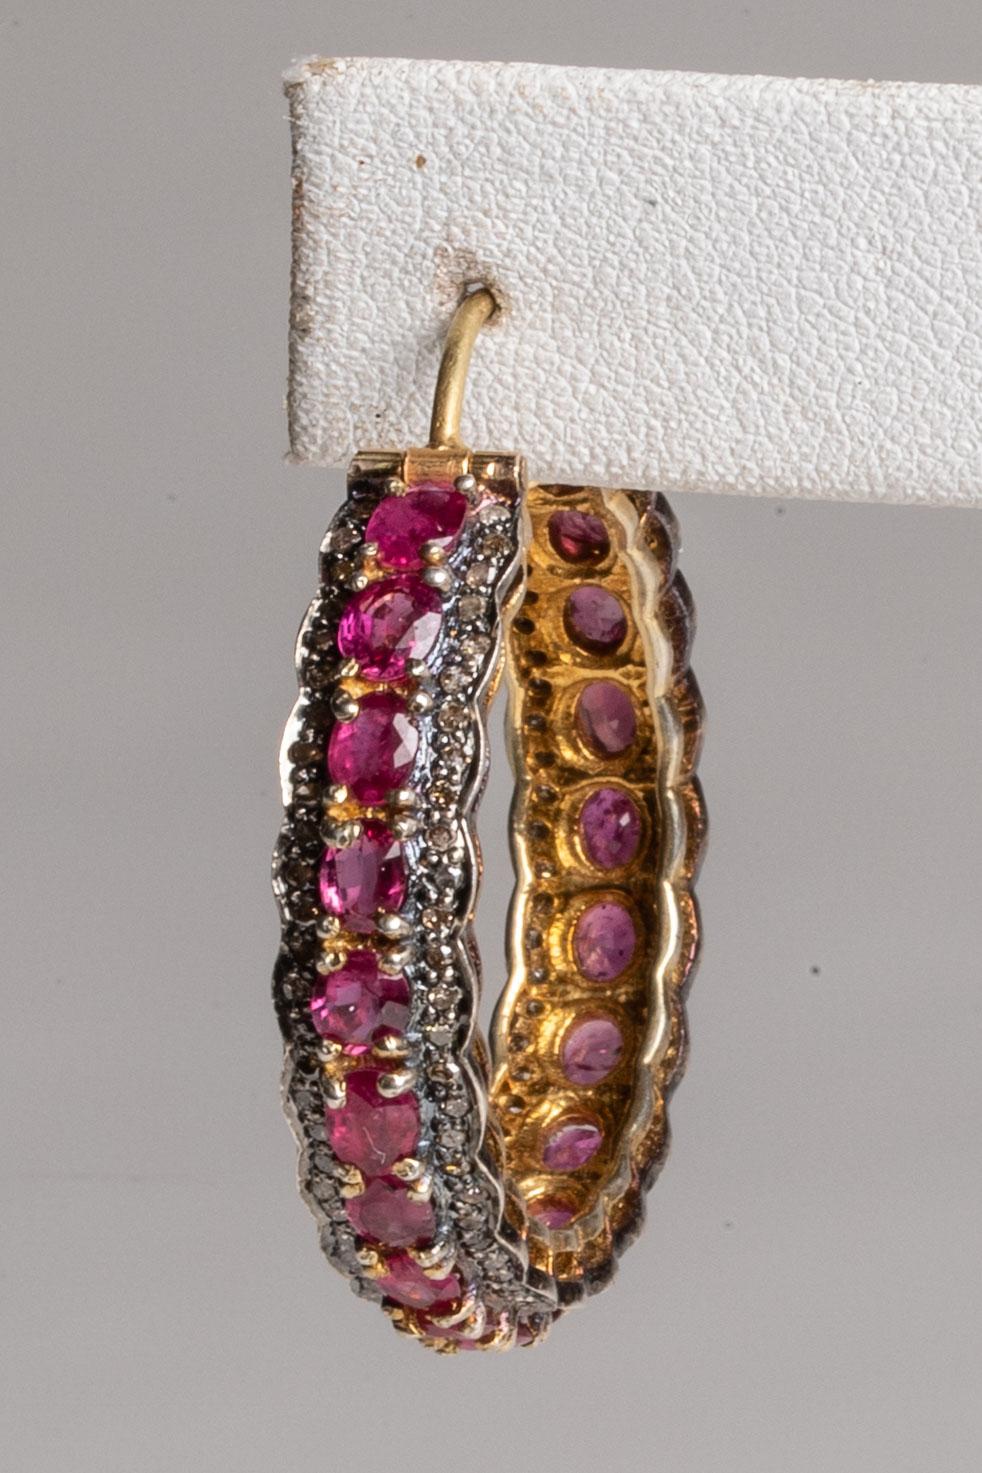 Faceted round rubies in a bezel setting bordered by round, brilliant cut diamonds in a pave` setting.  The stones run all the way around the hoop from the front to the back and set in vermeil (gold over sterling).  The post is is 18K gold for